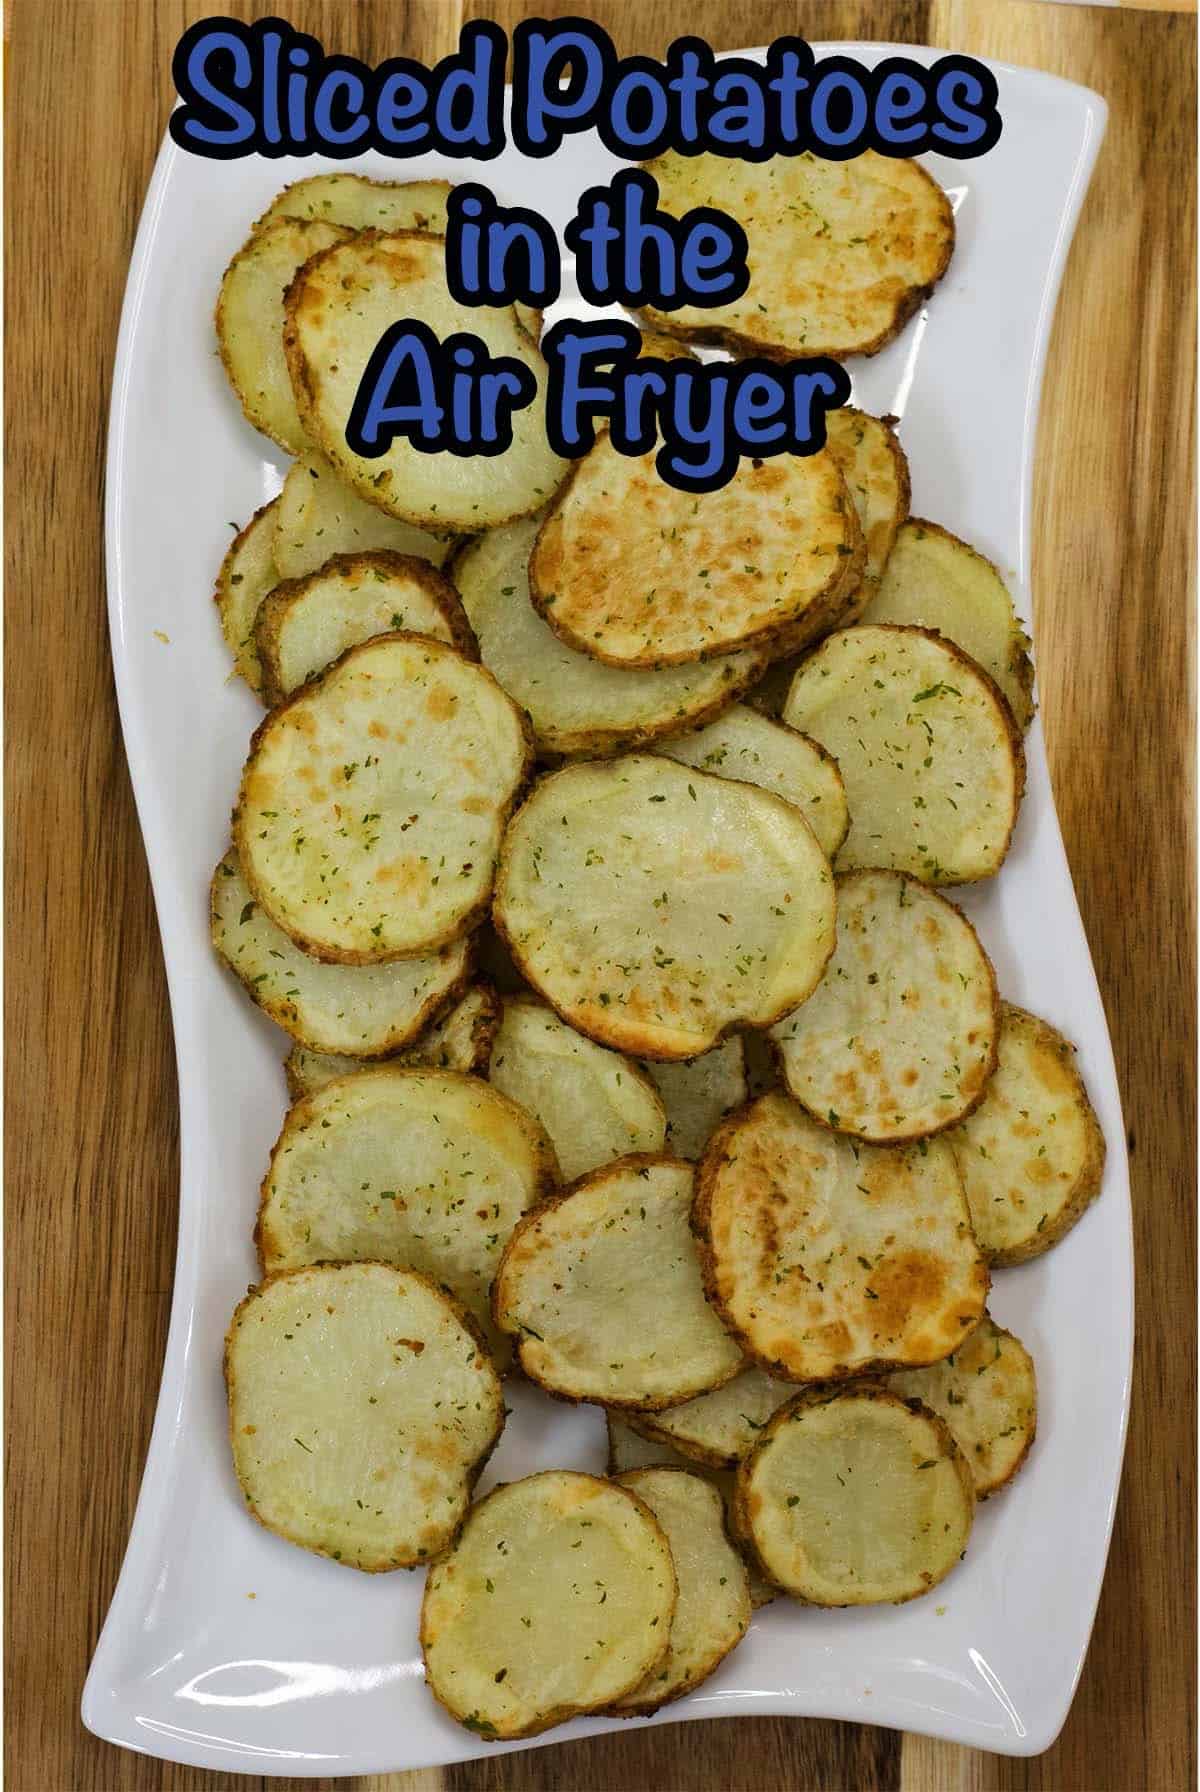 The finished sliced potatoes in the air fryer with the recipe title at the top of the image.